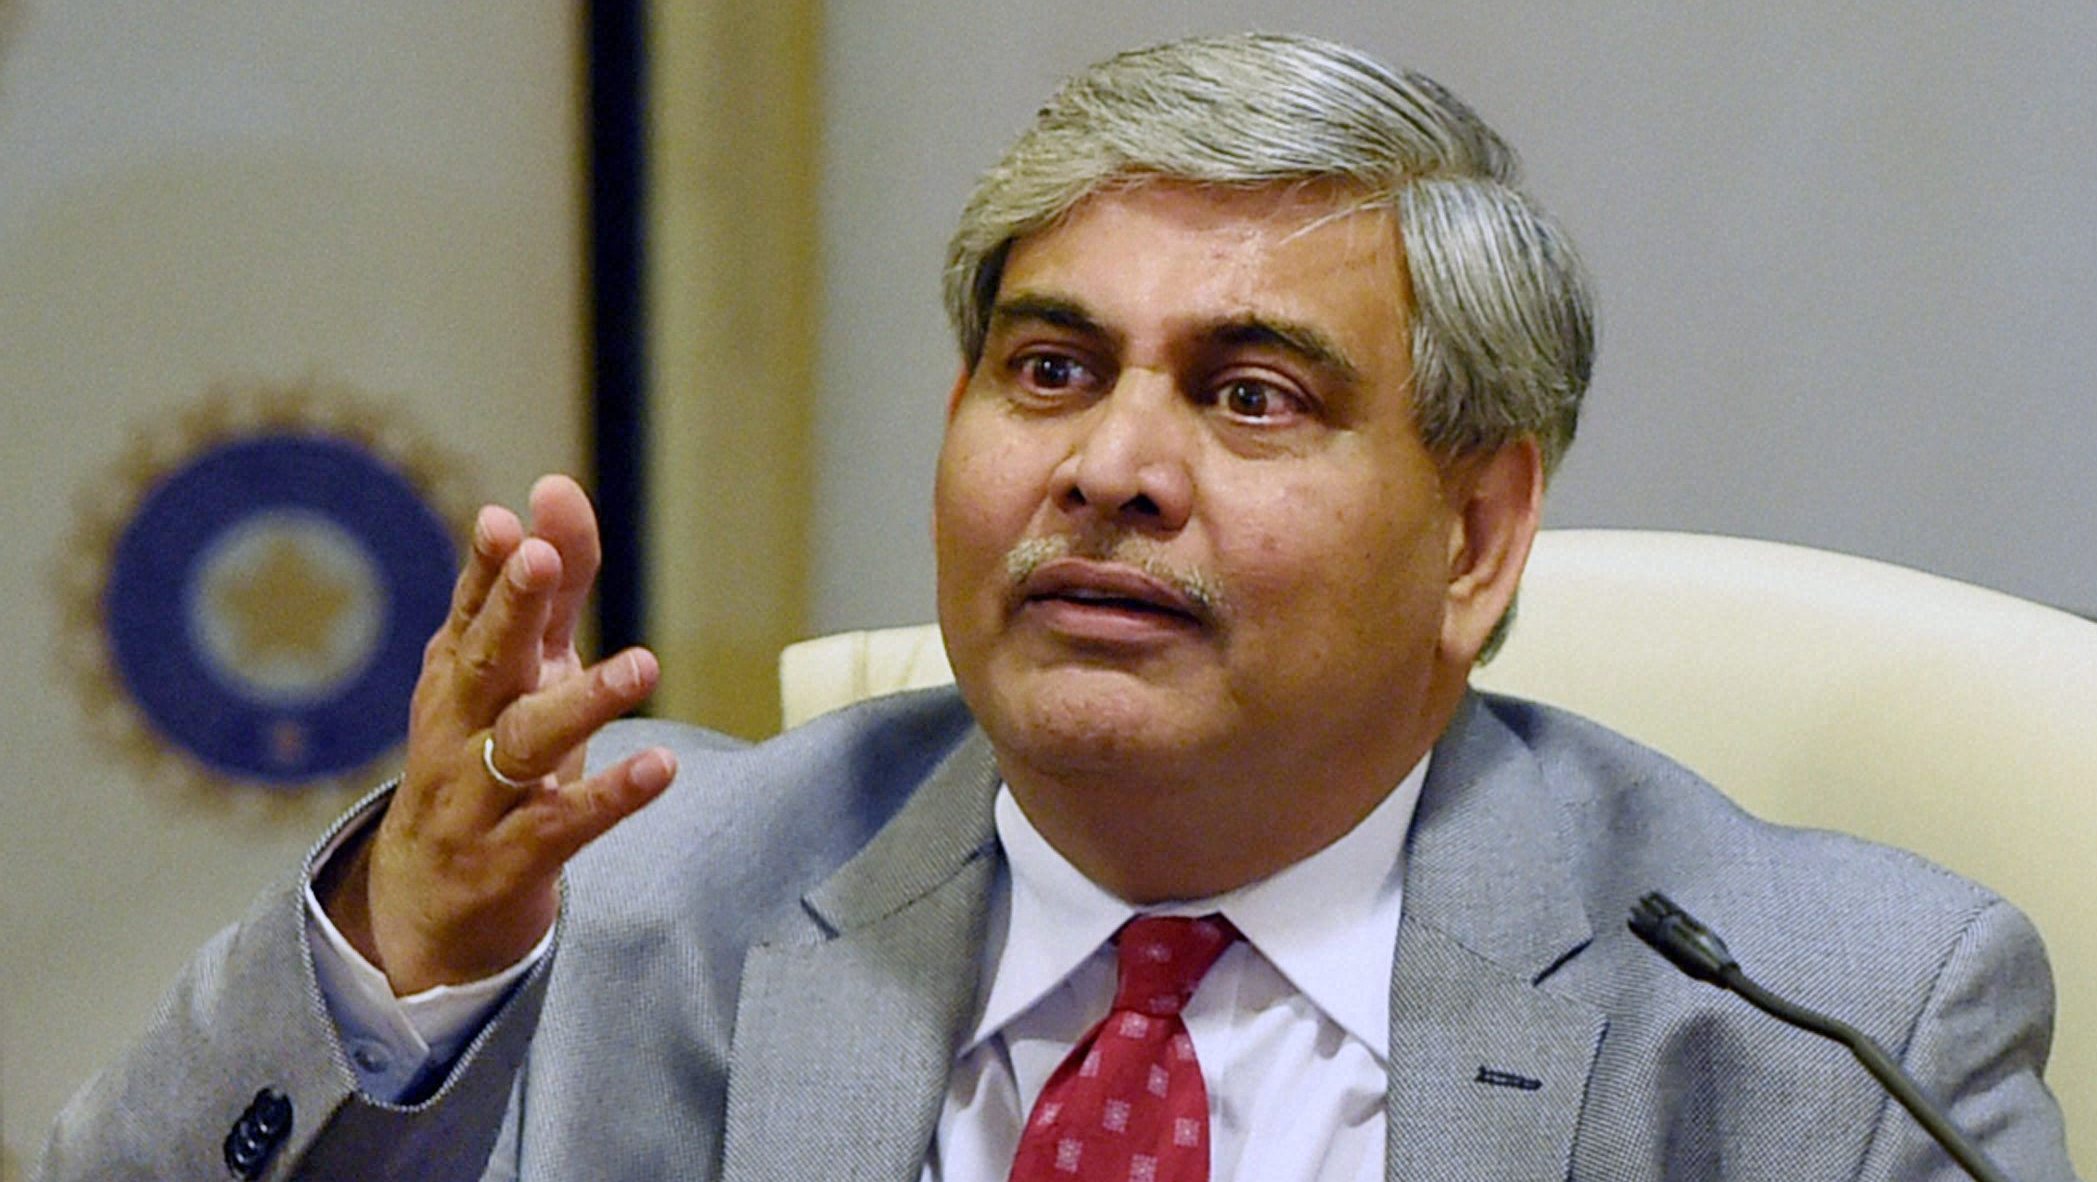 Shashank Manohar Resigns from ICC,ICC Chairman Resigns,Shashank Manohar resigns as ICC Chairman,Shashank Manohar steps down,Shashank Resigns as ICC Chairman,international news,national news,sports news,International Cricket Council,bcci, Board of Control for Cricket in India